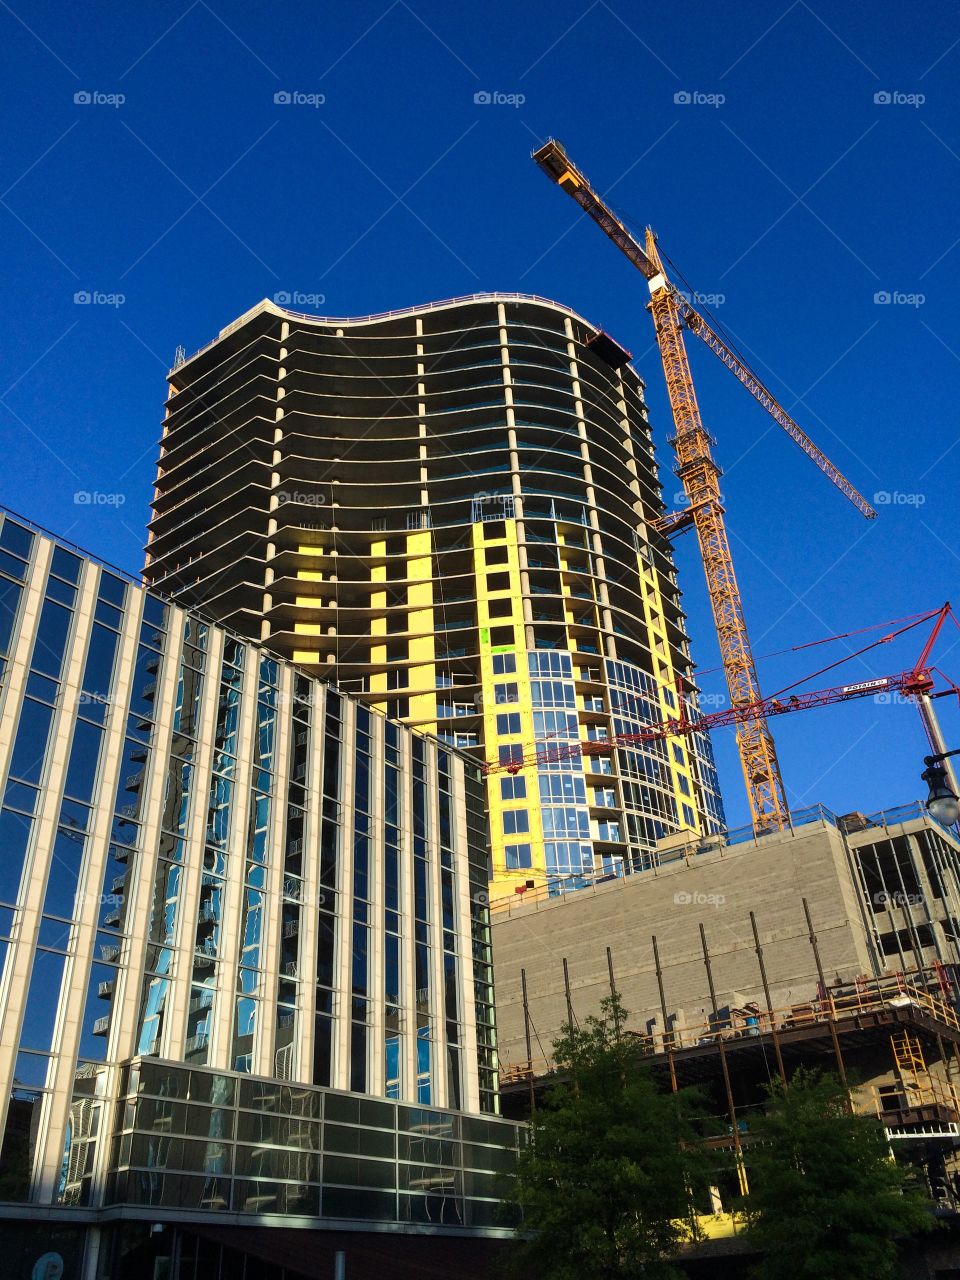 Building under construction with two cranes 